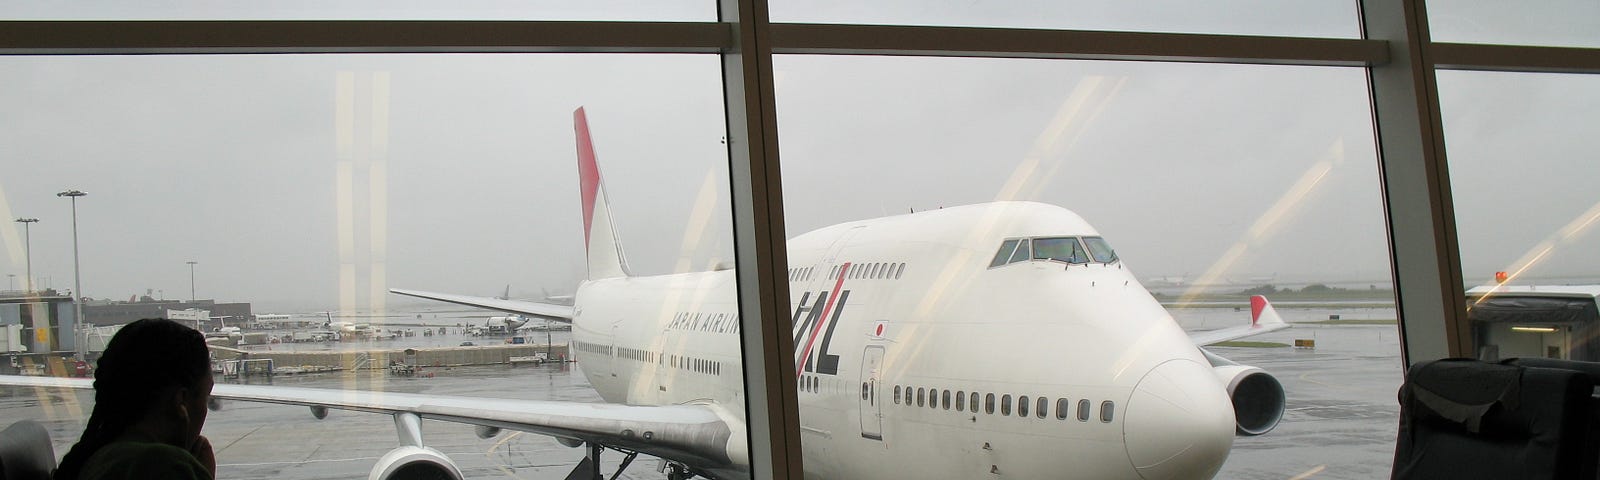 View of the JAL plane through the terminal window at JFK International Airport n NYC.